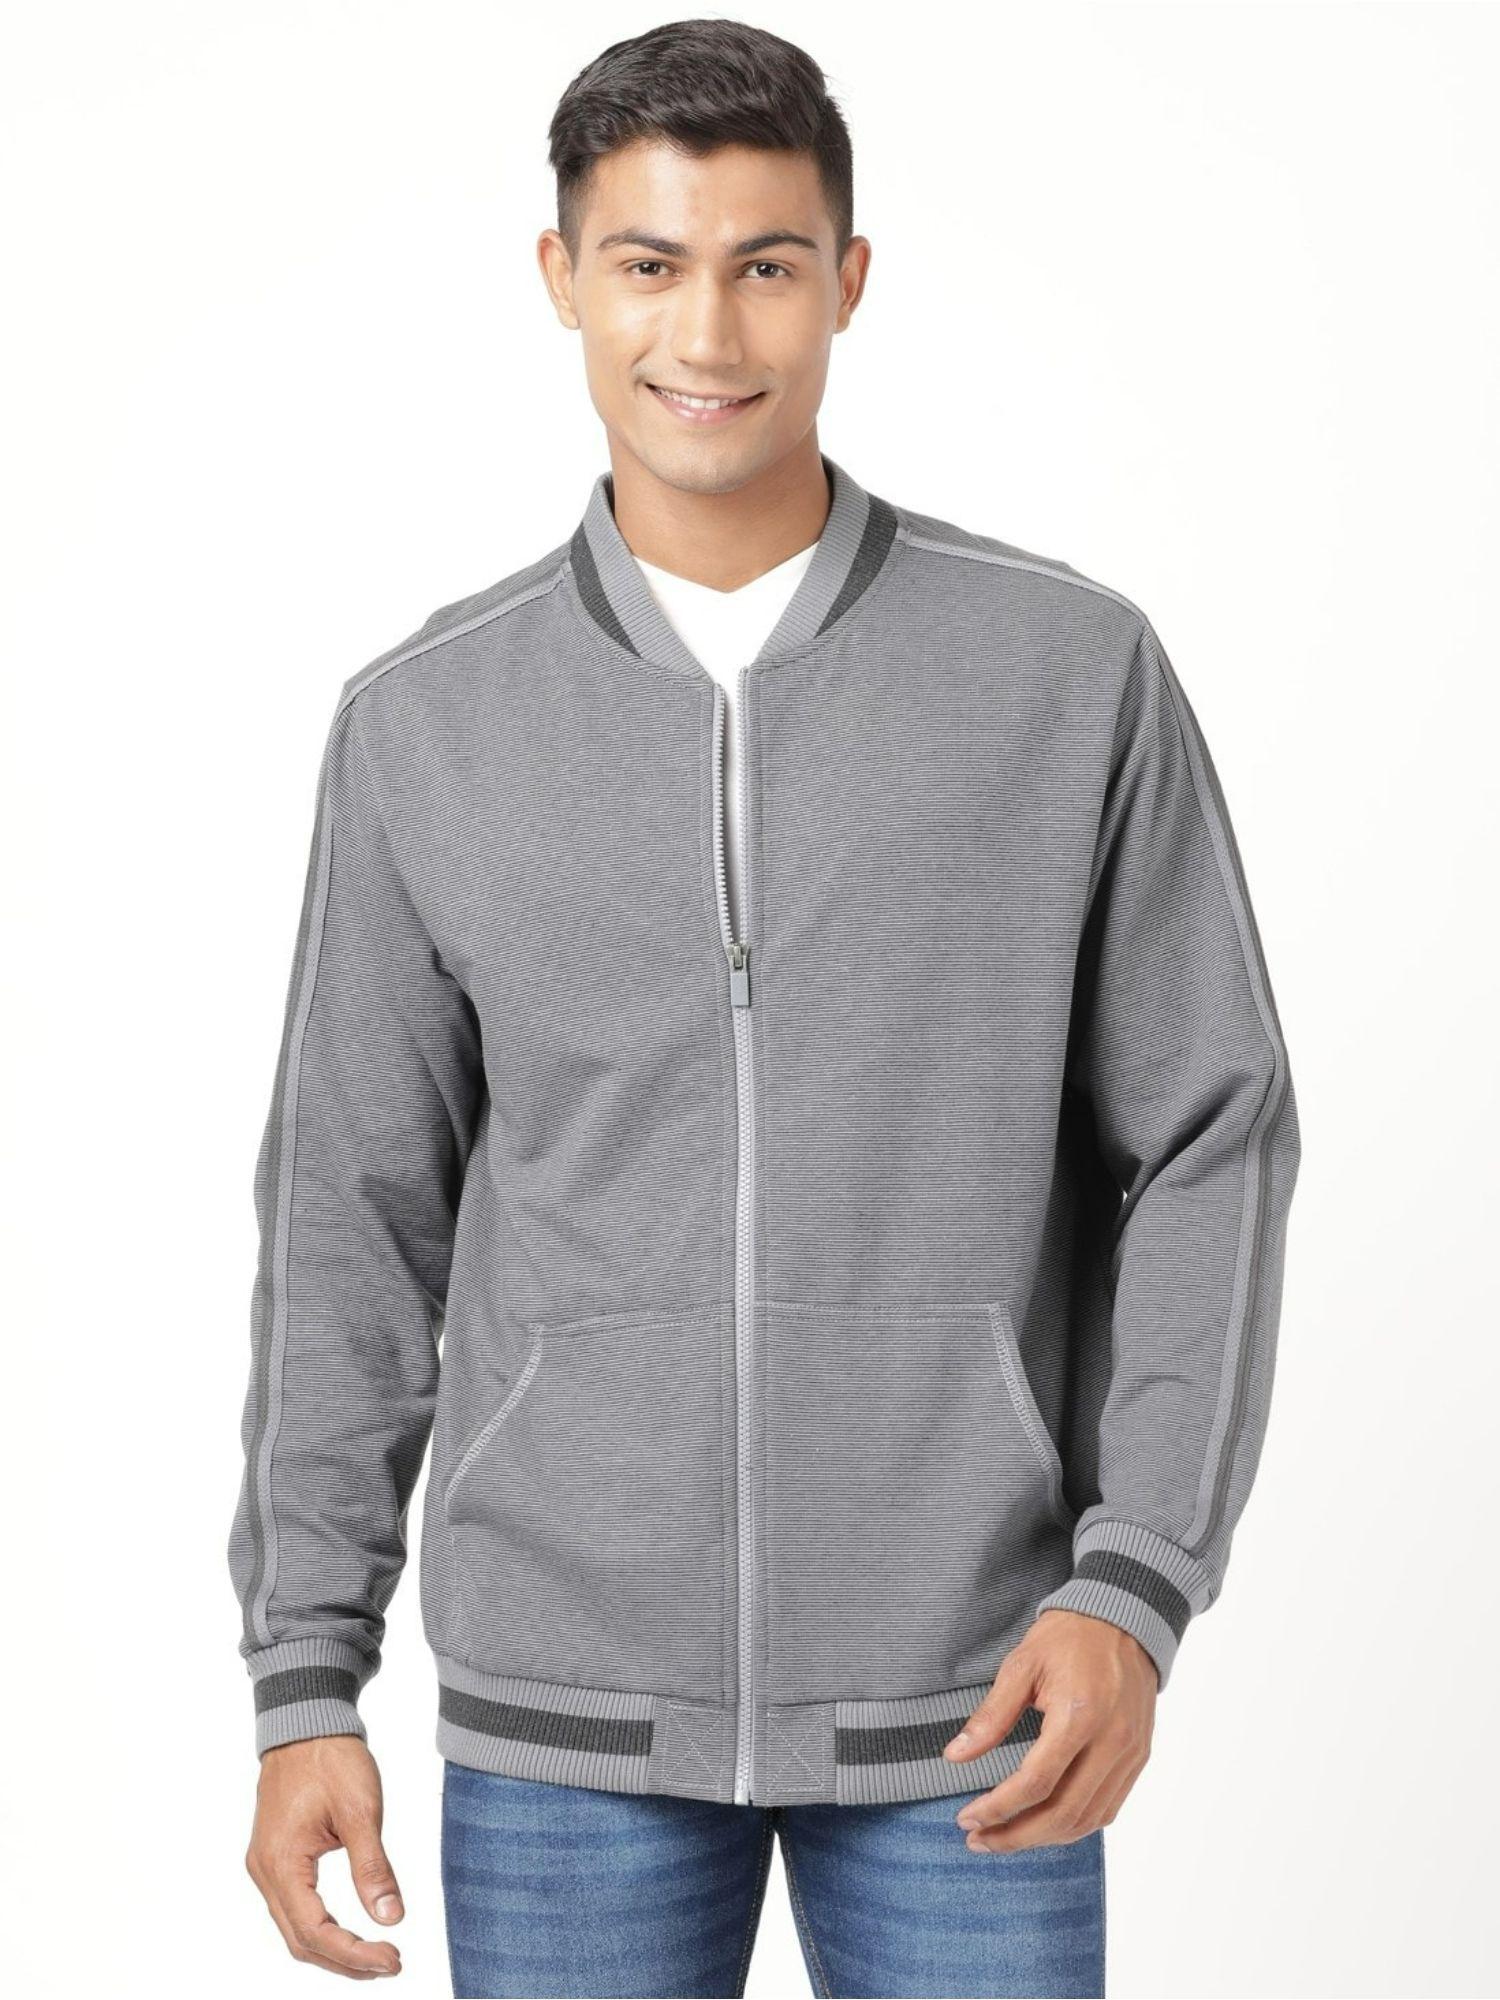 am92-mens-cotton-rich-fleece-fabric-jacket-with-stay-warm-treatment-grey